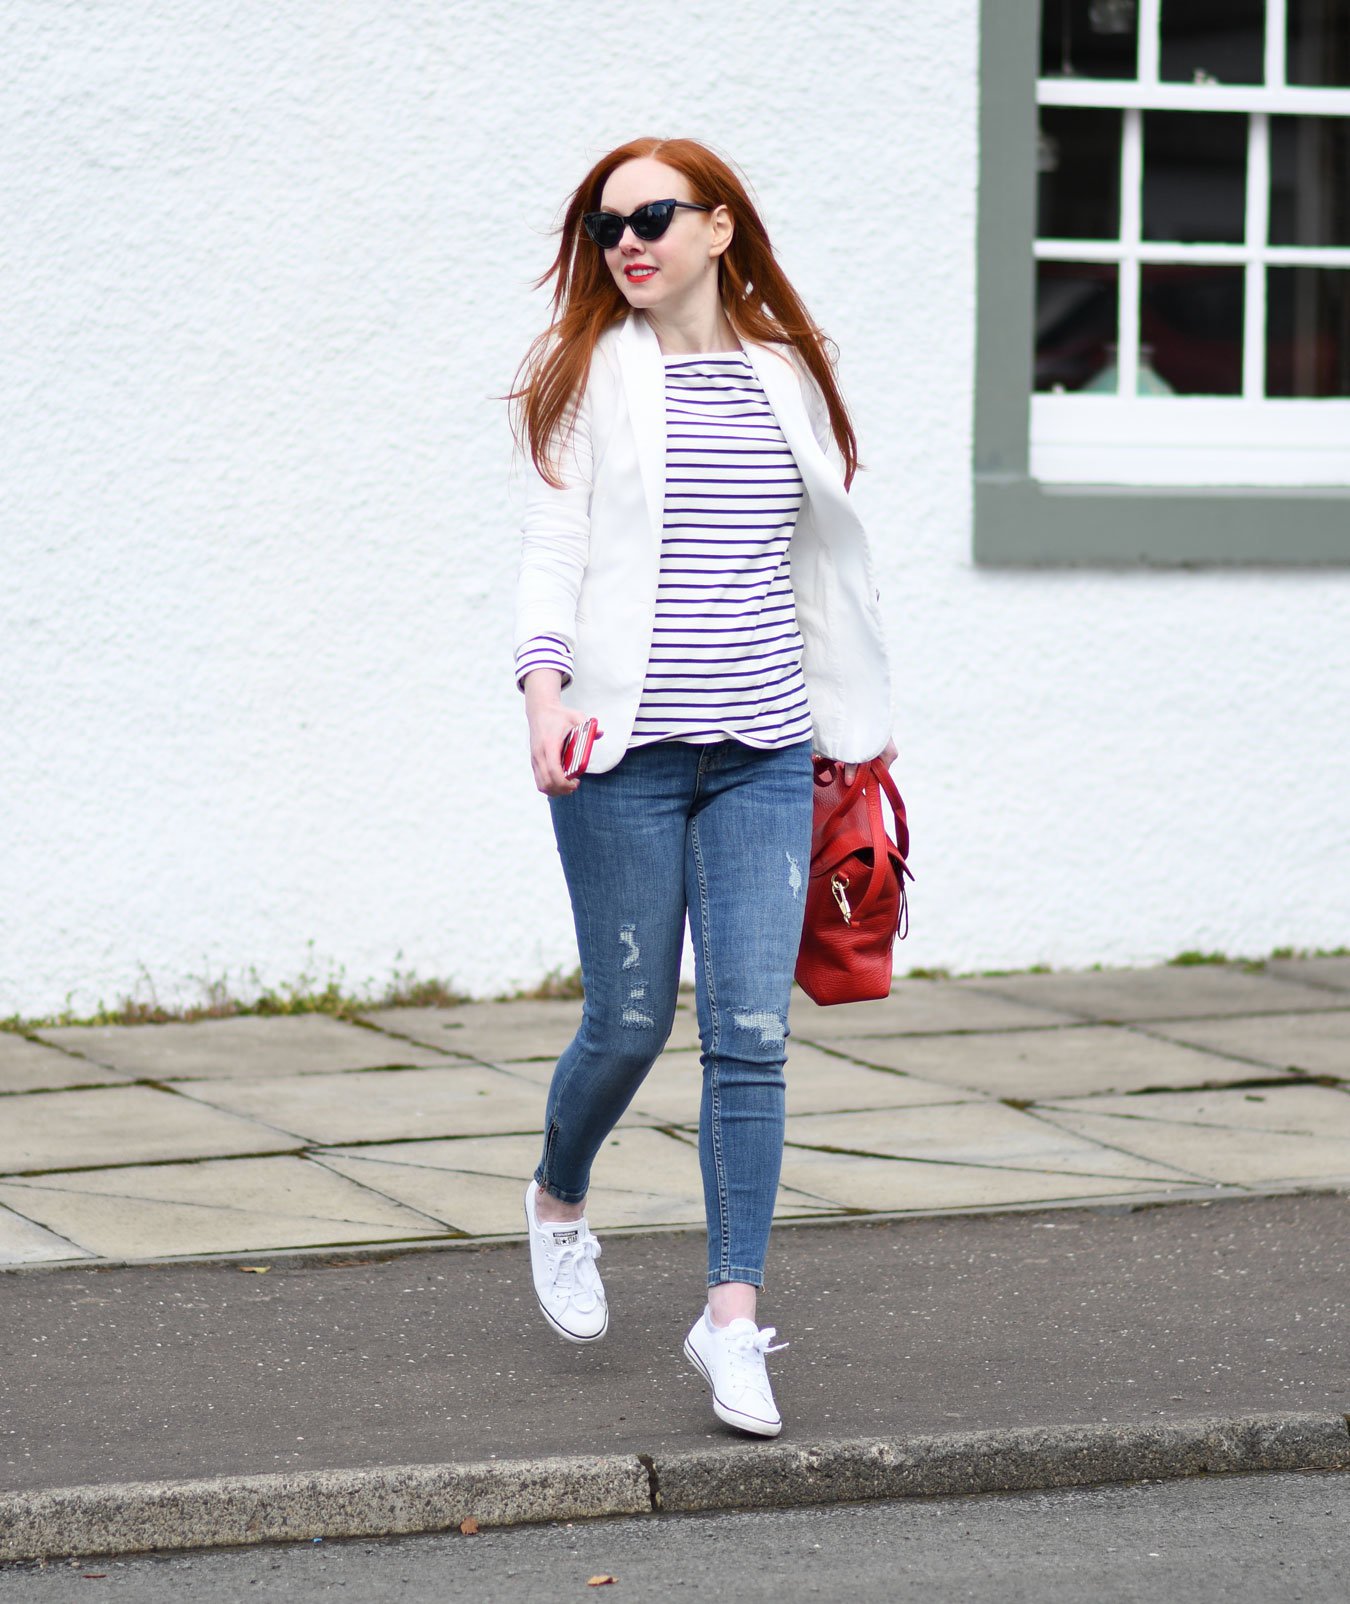 classic casual outfit: blue jeans with Breton top, white blazer and sneakers